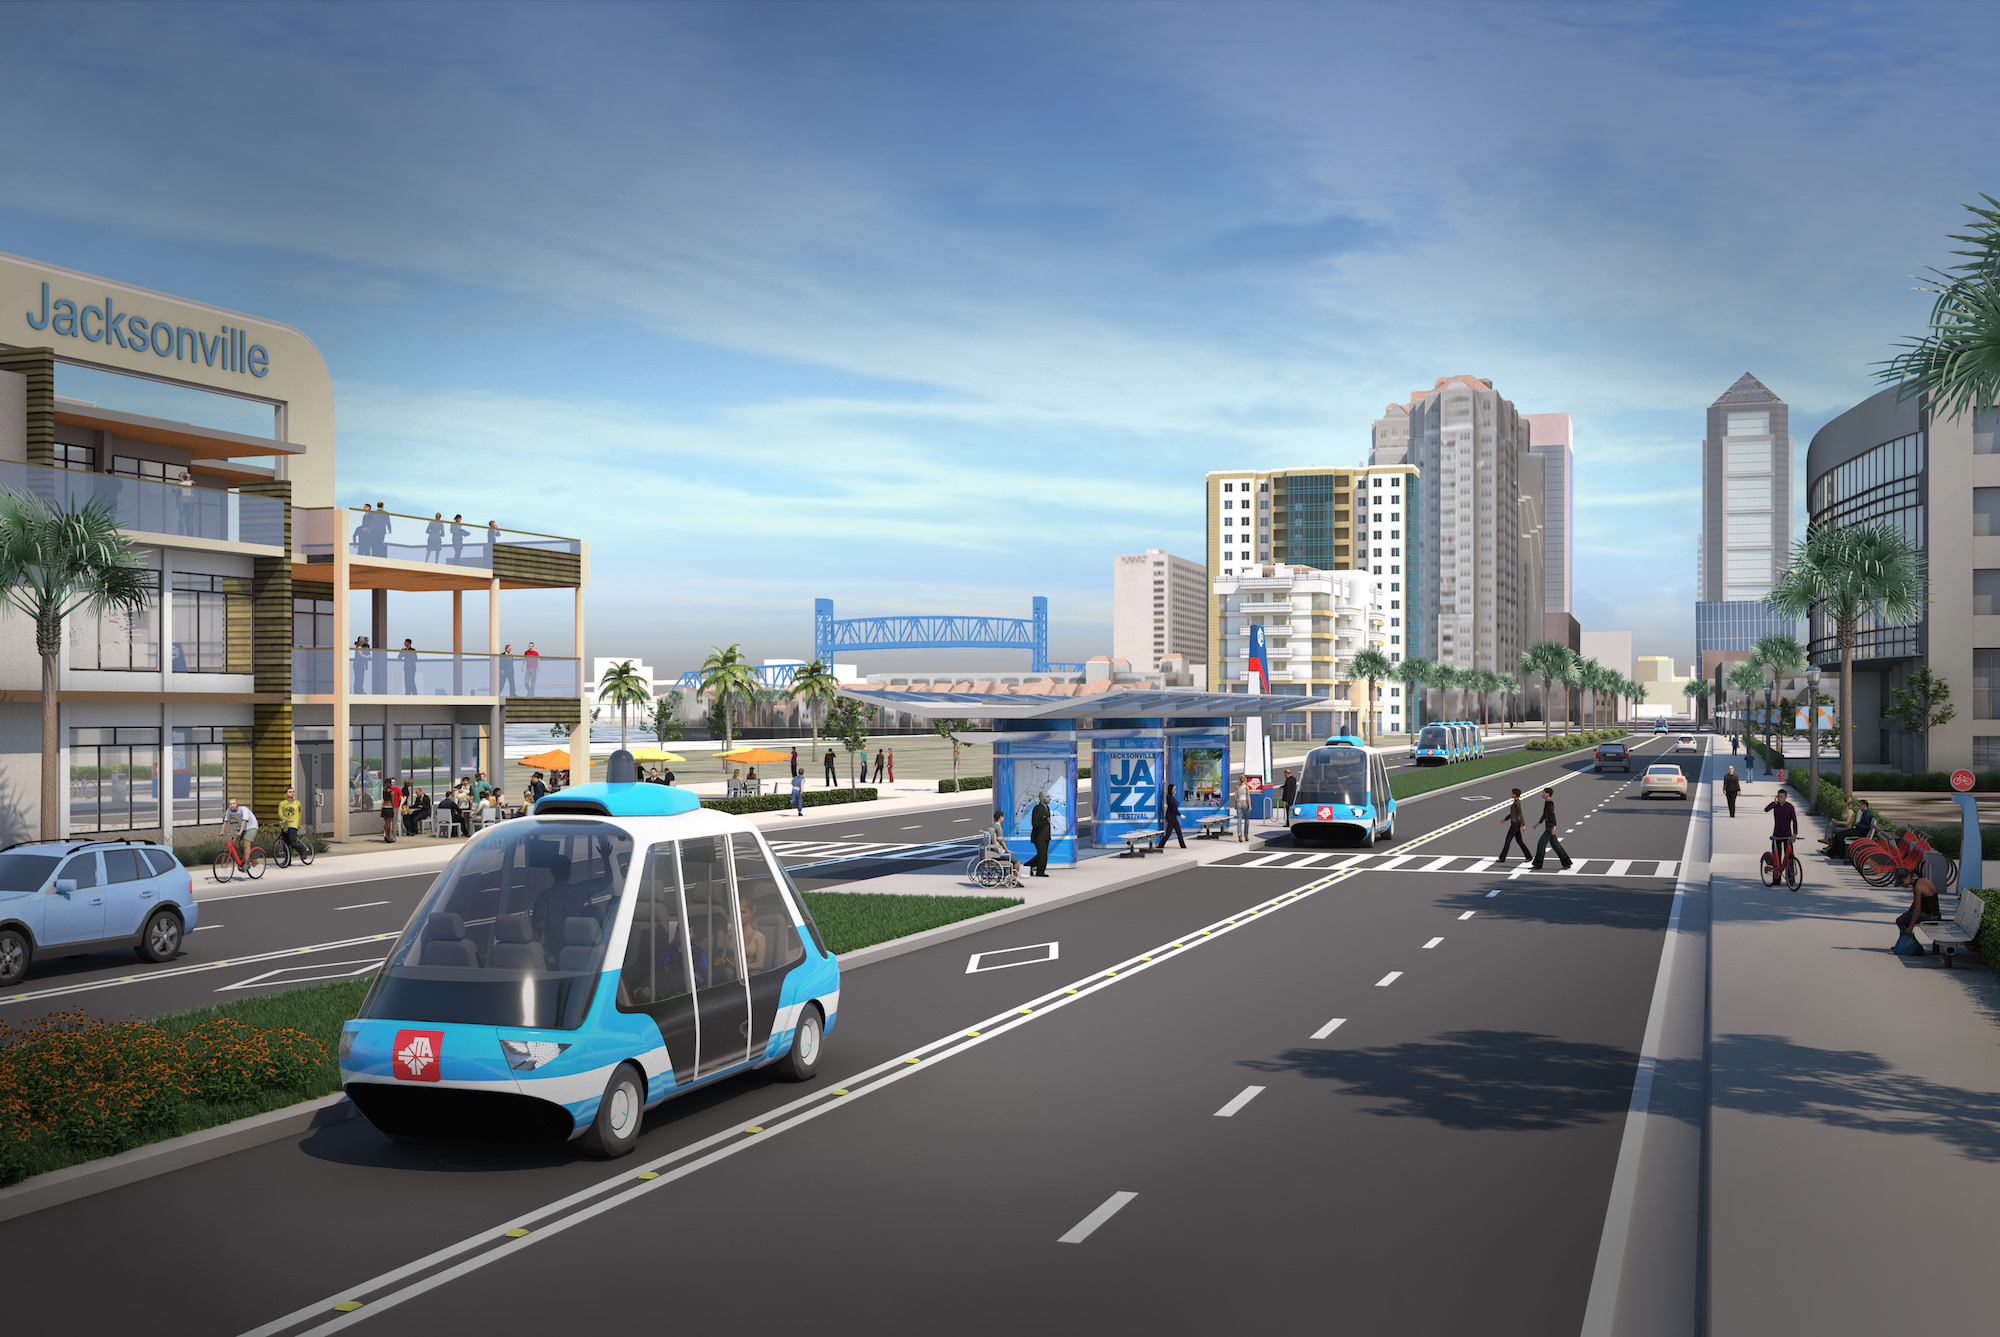 Gas tax revenue will be used to convert the Skyway’s existing elevated monorail track into a roadway for autonomous vehicles.